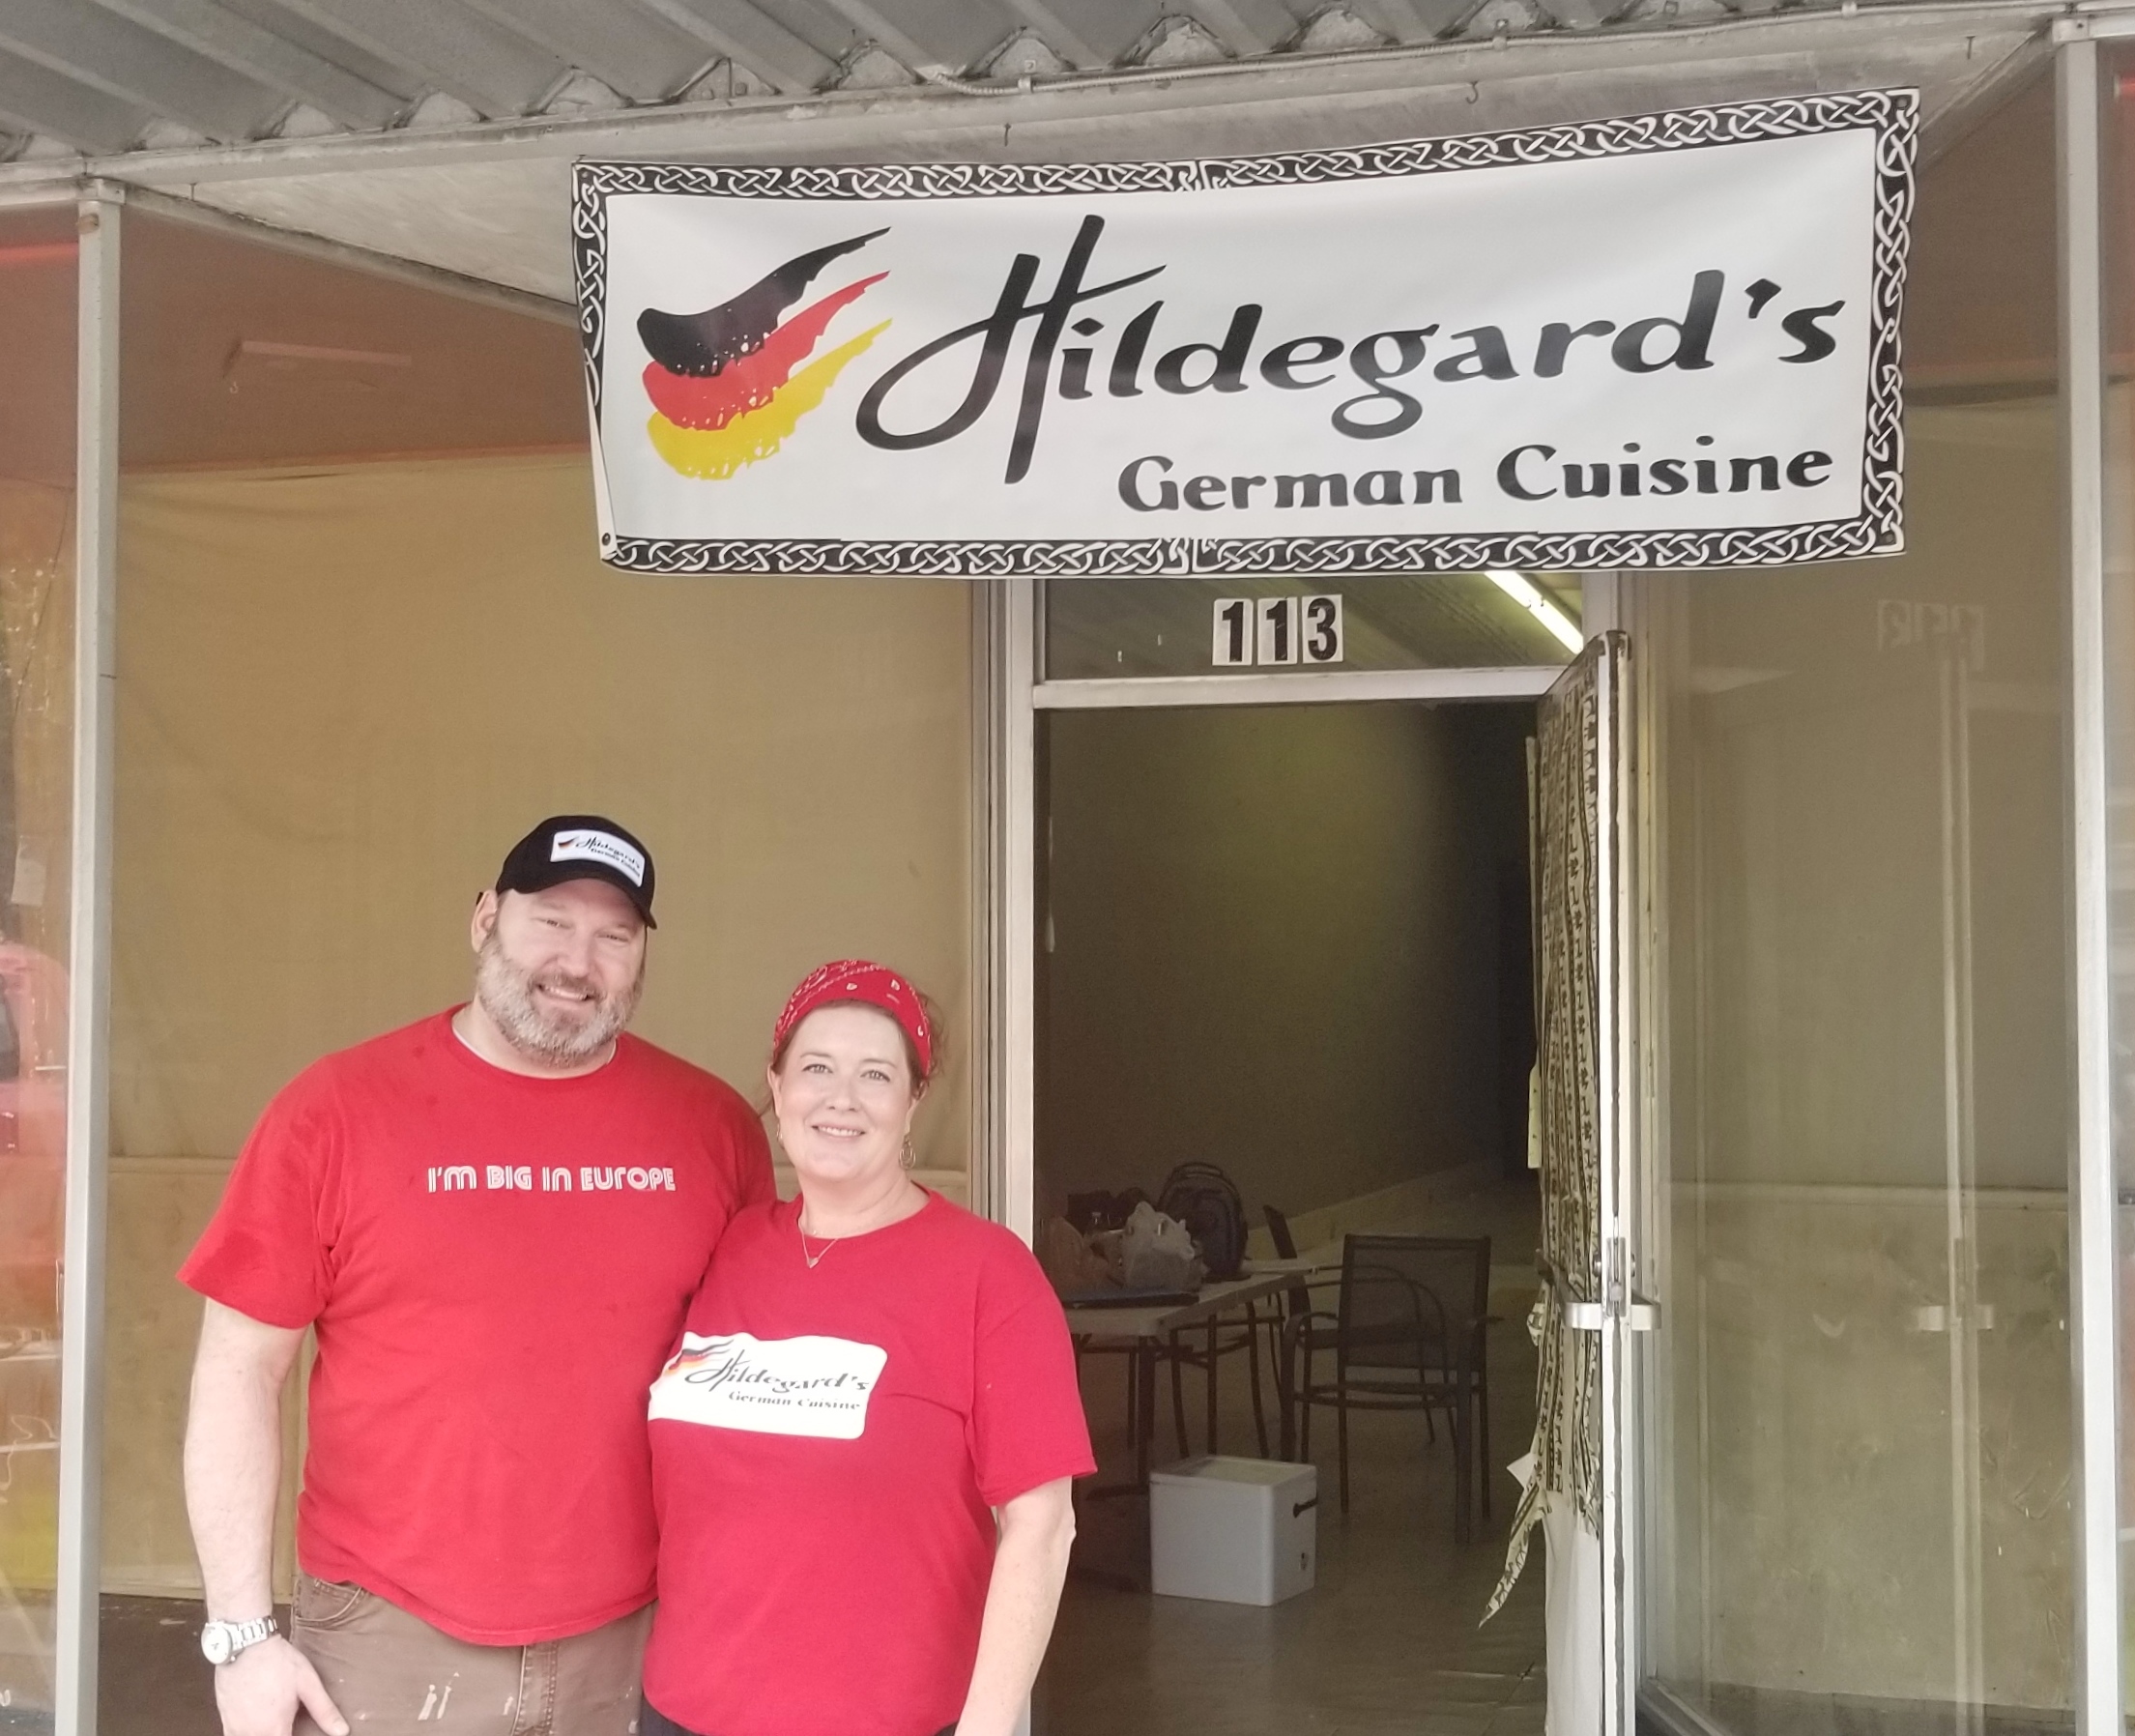 City of Athens and Athens Main Street welcome Hildegard’s German Cuisine to the downtown Square